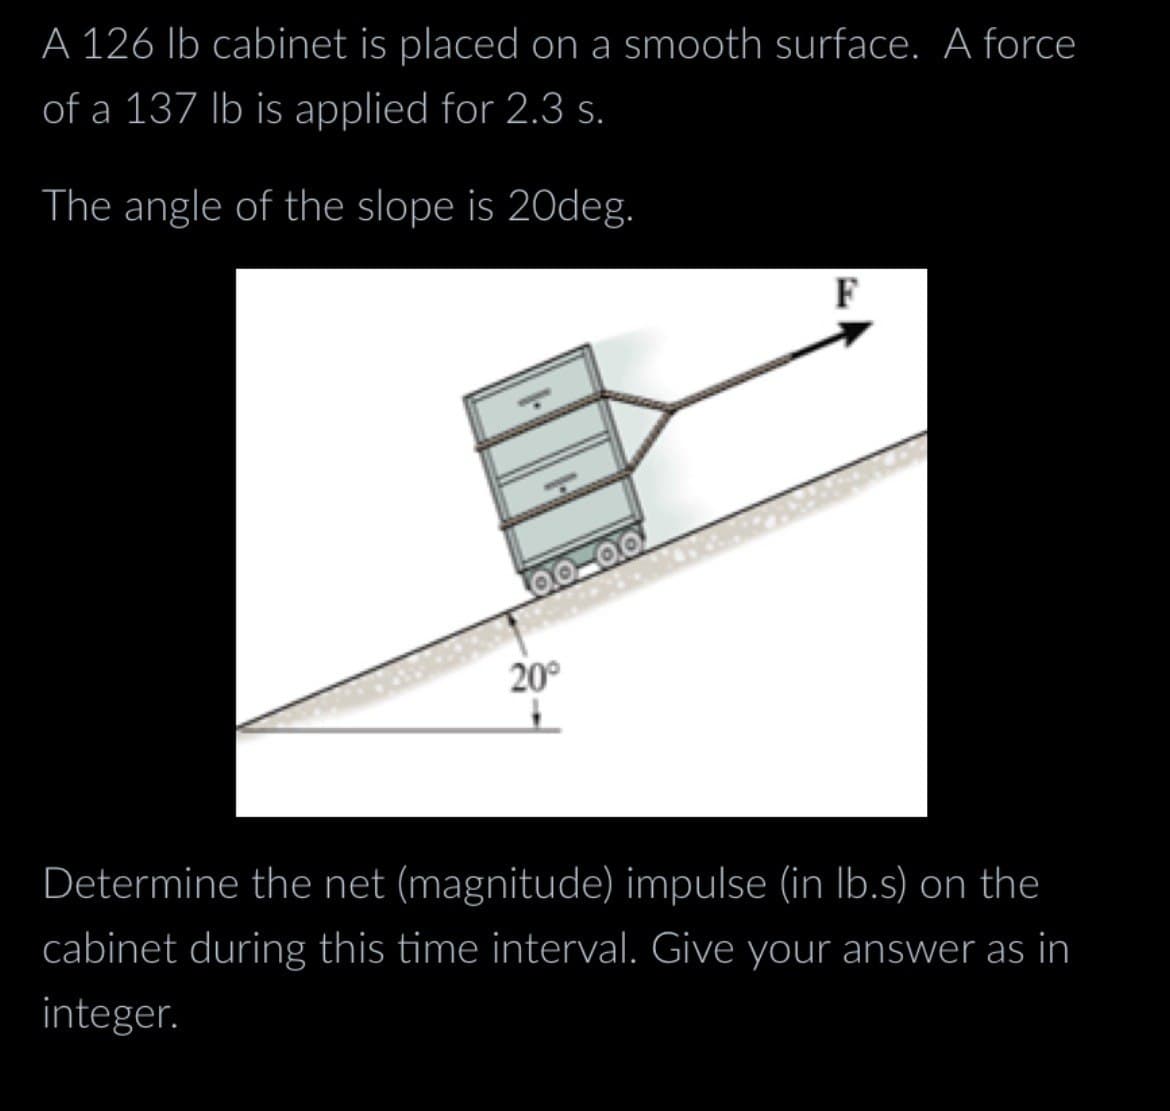 A 126 lb cabinet is placed on a smooth surface. A force
of a 137 lb is applied for 2.3 s.
The angle of the slope is 20deg.
0.0-0.0
20°
F
Determine the net (magnitude) impulse (in lb.s) on the
cabinet during this time interval. Give your answer as in
integer.